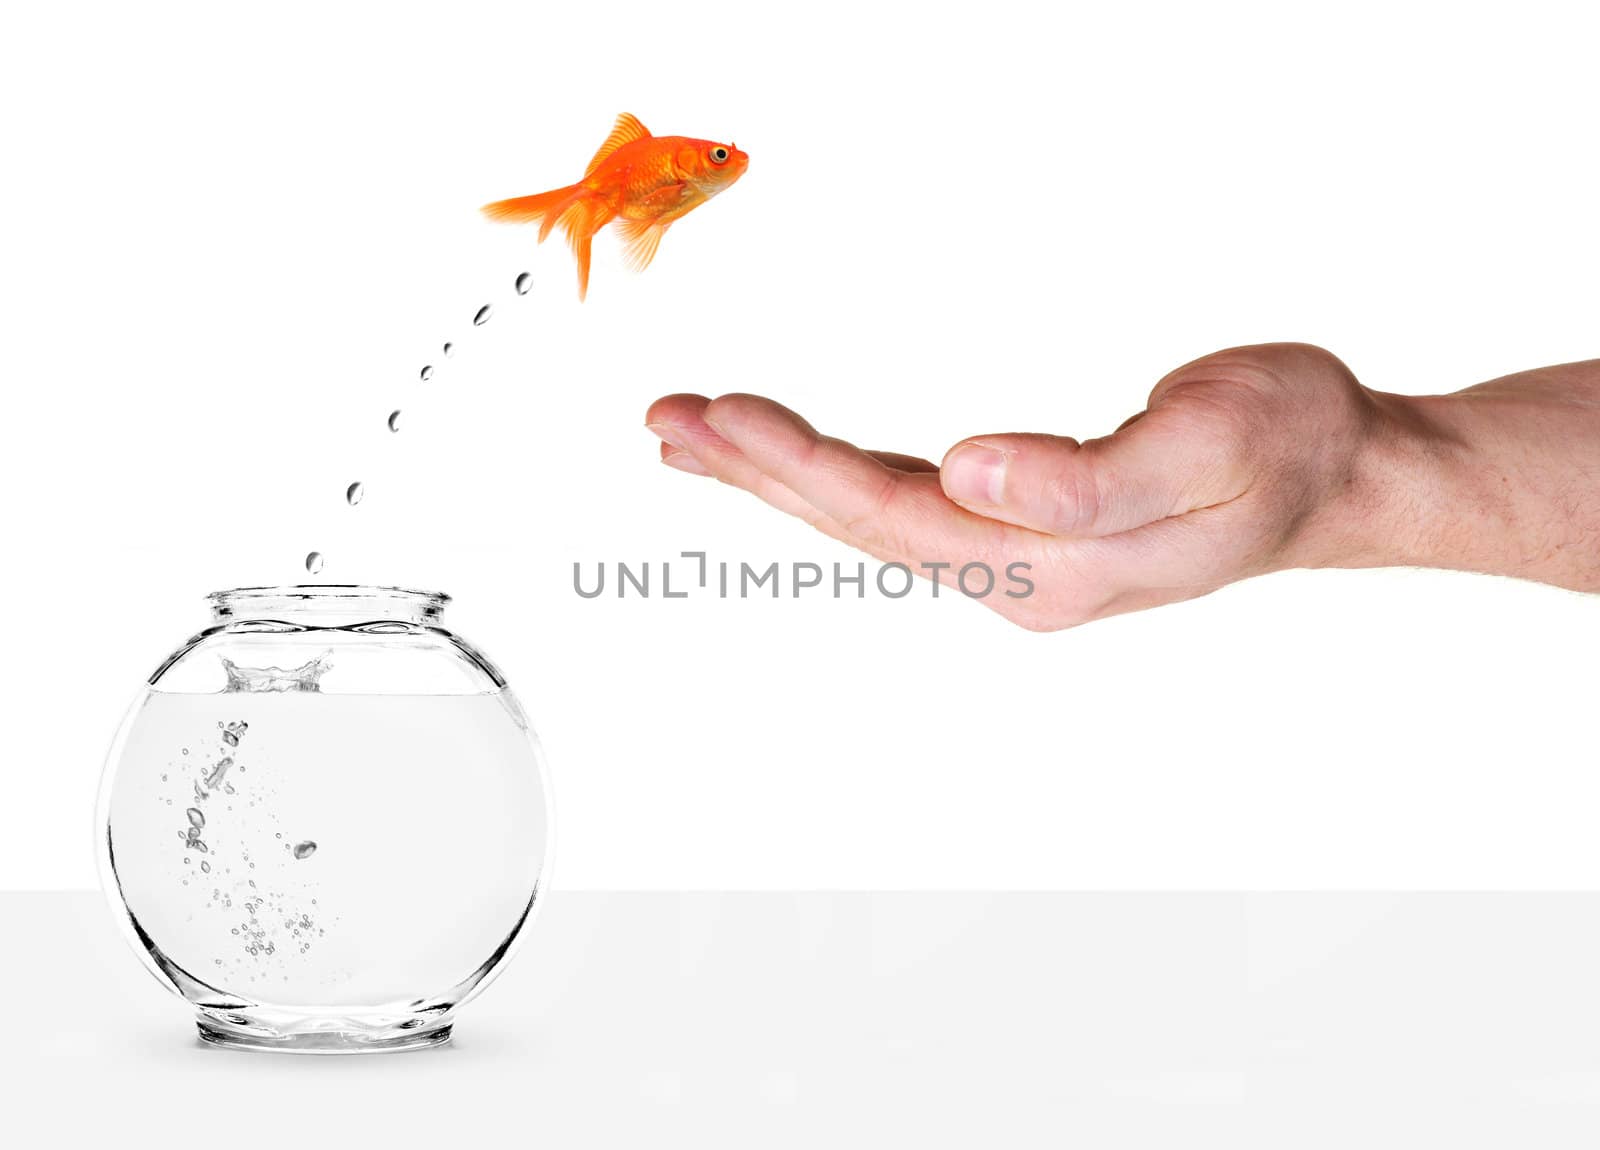 goldfish jumping out of fishbowl and into human palm by jjayo